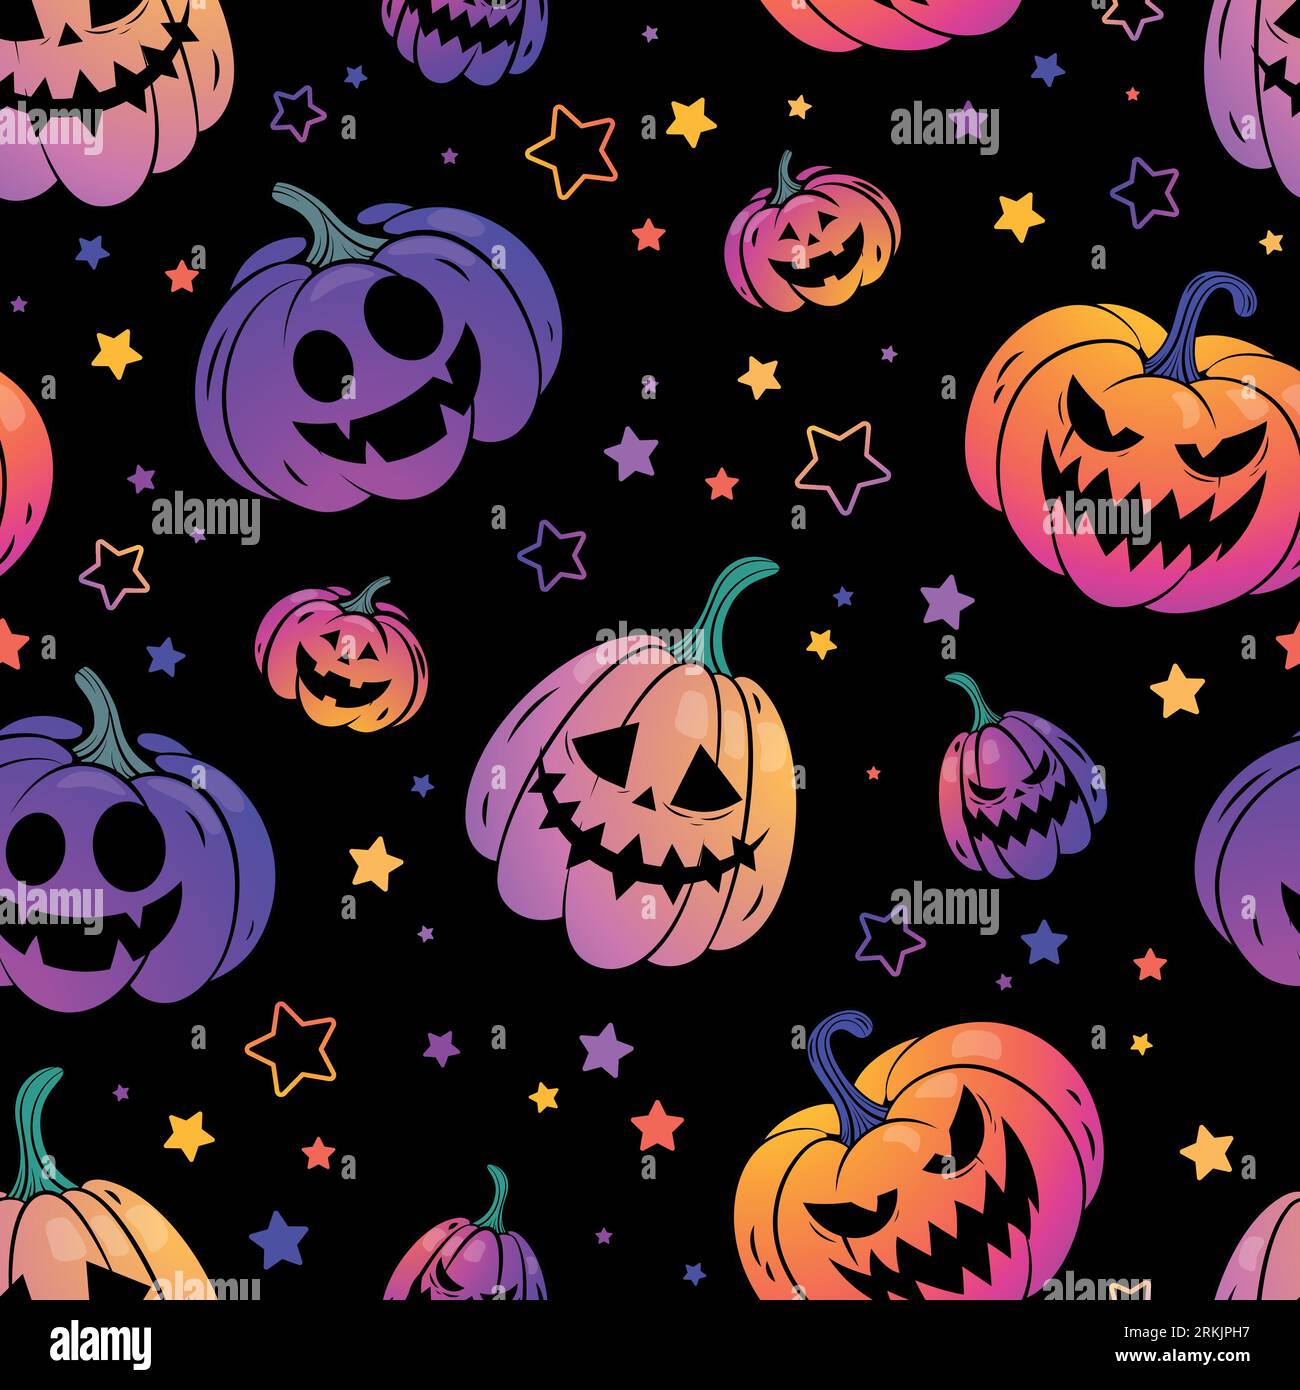 Halloween seamless pattern with black background and carved neon pumpkins. Stock Vector